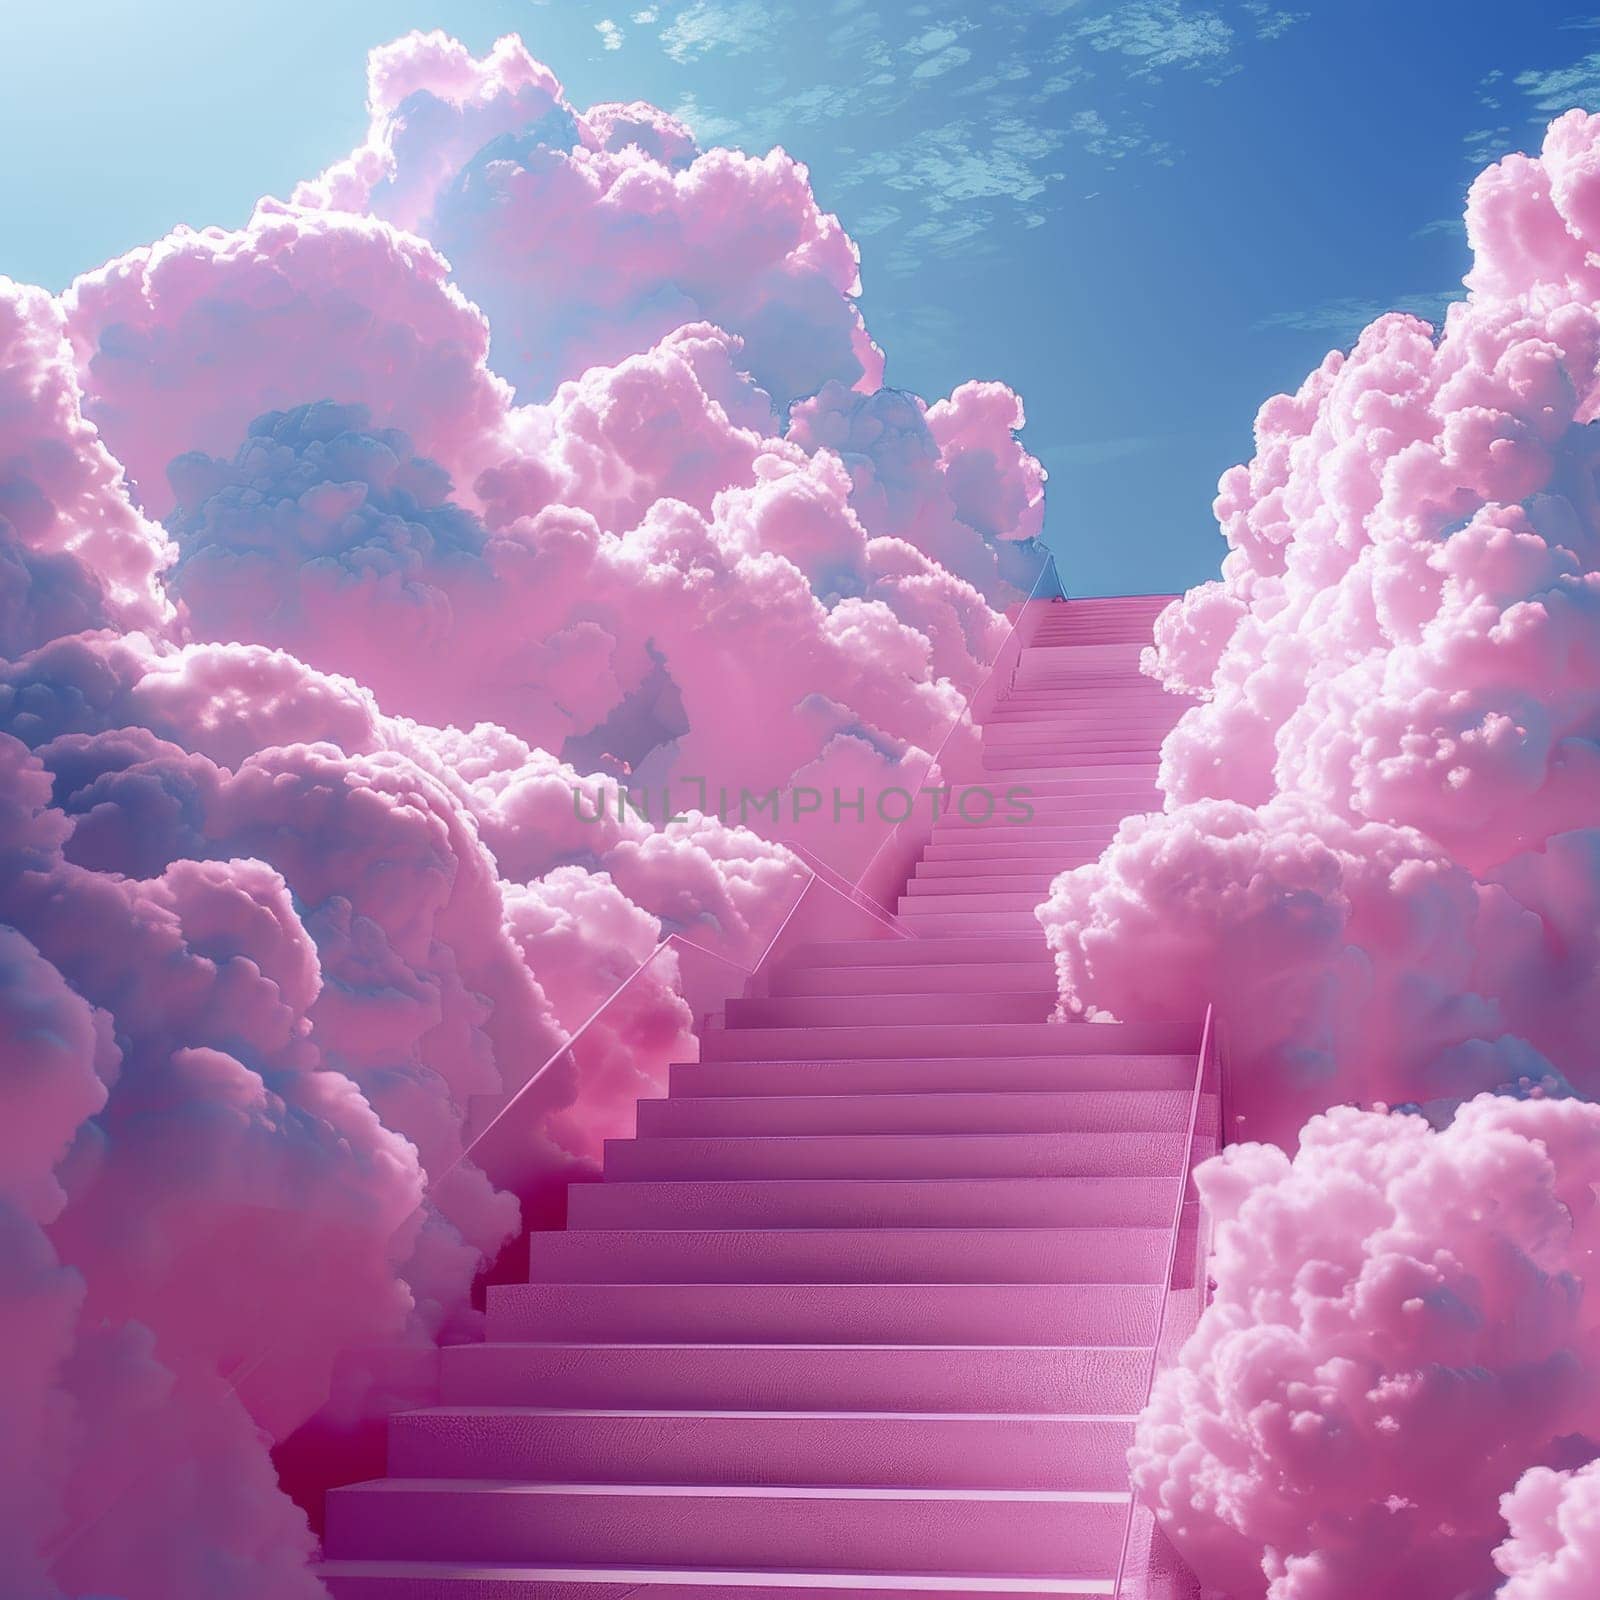 A pink sky with a staircase in the clouds. The image has a dreamy and whimsical mood, as if the viewer is looking up at a magical world